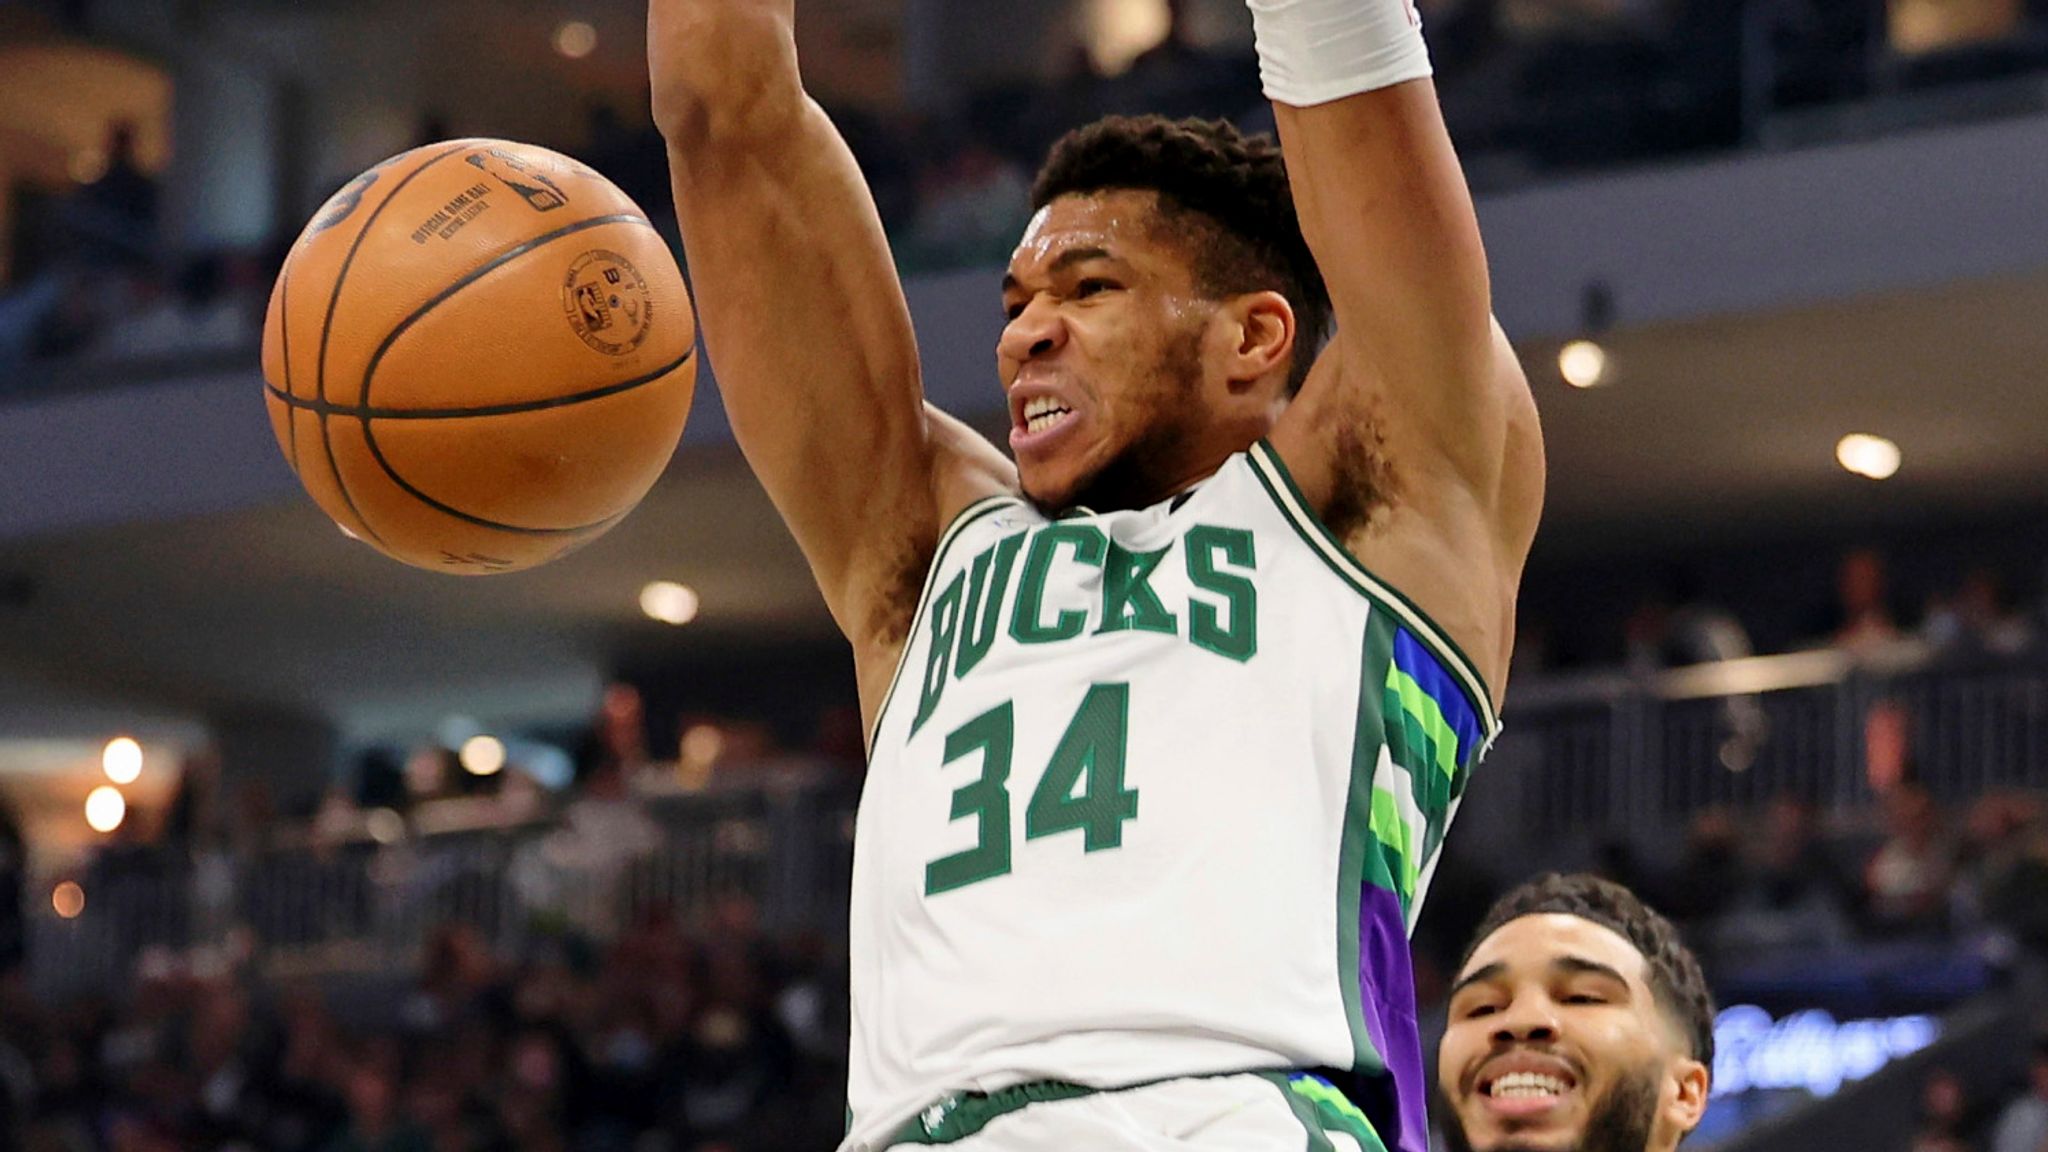 Bucks' Antetokounmpo out, Hawks' Young starting in Game 6 – Saratogian